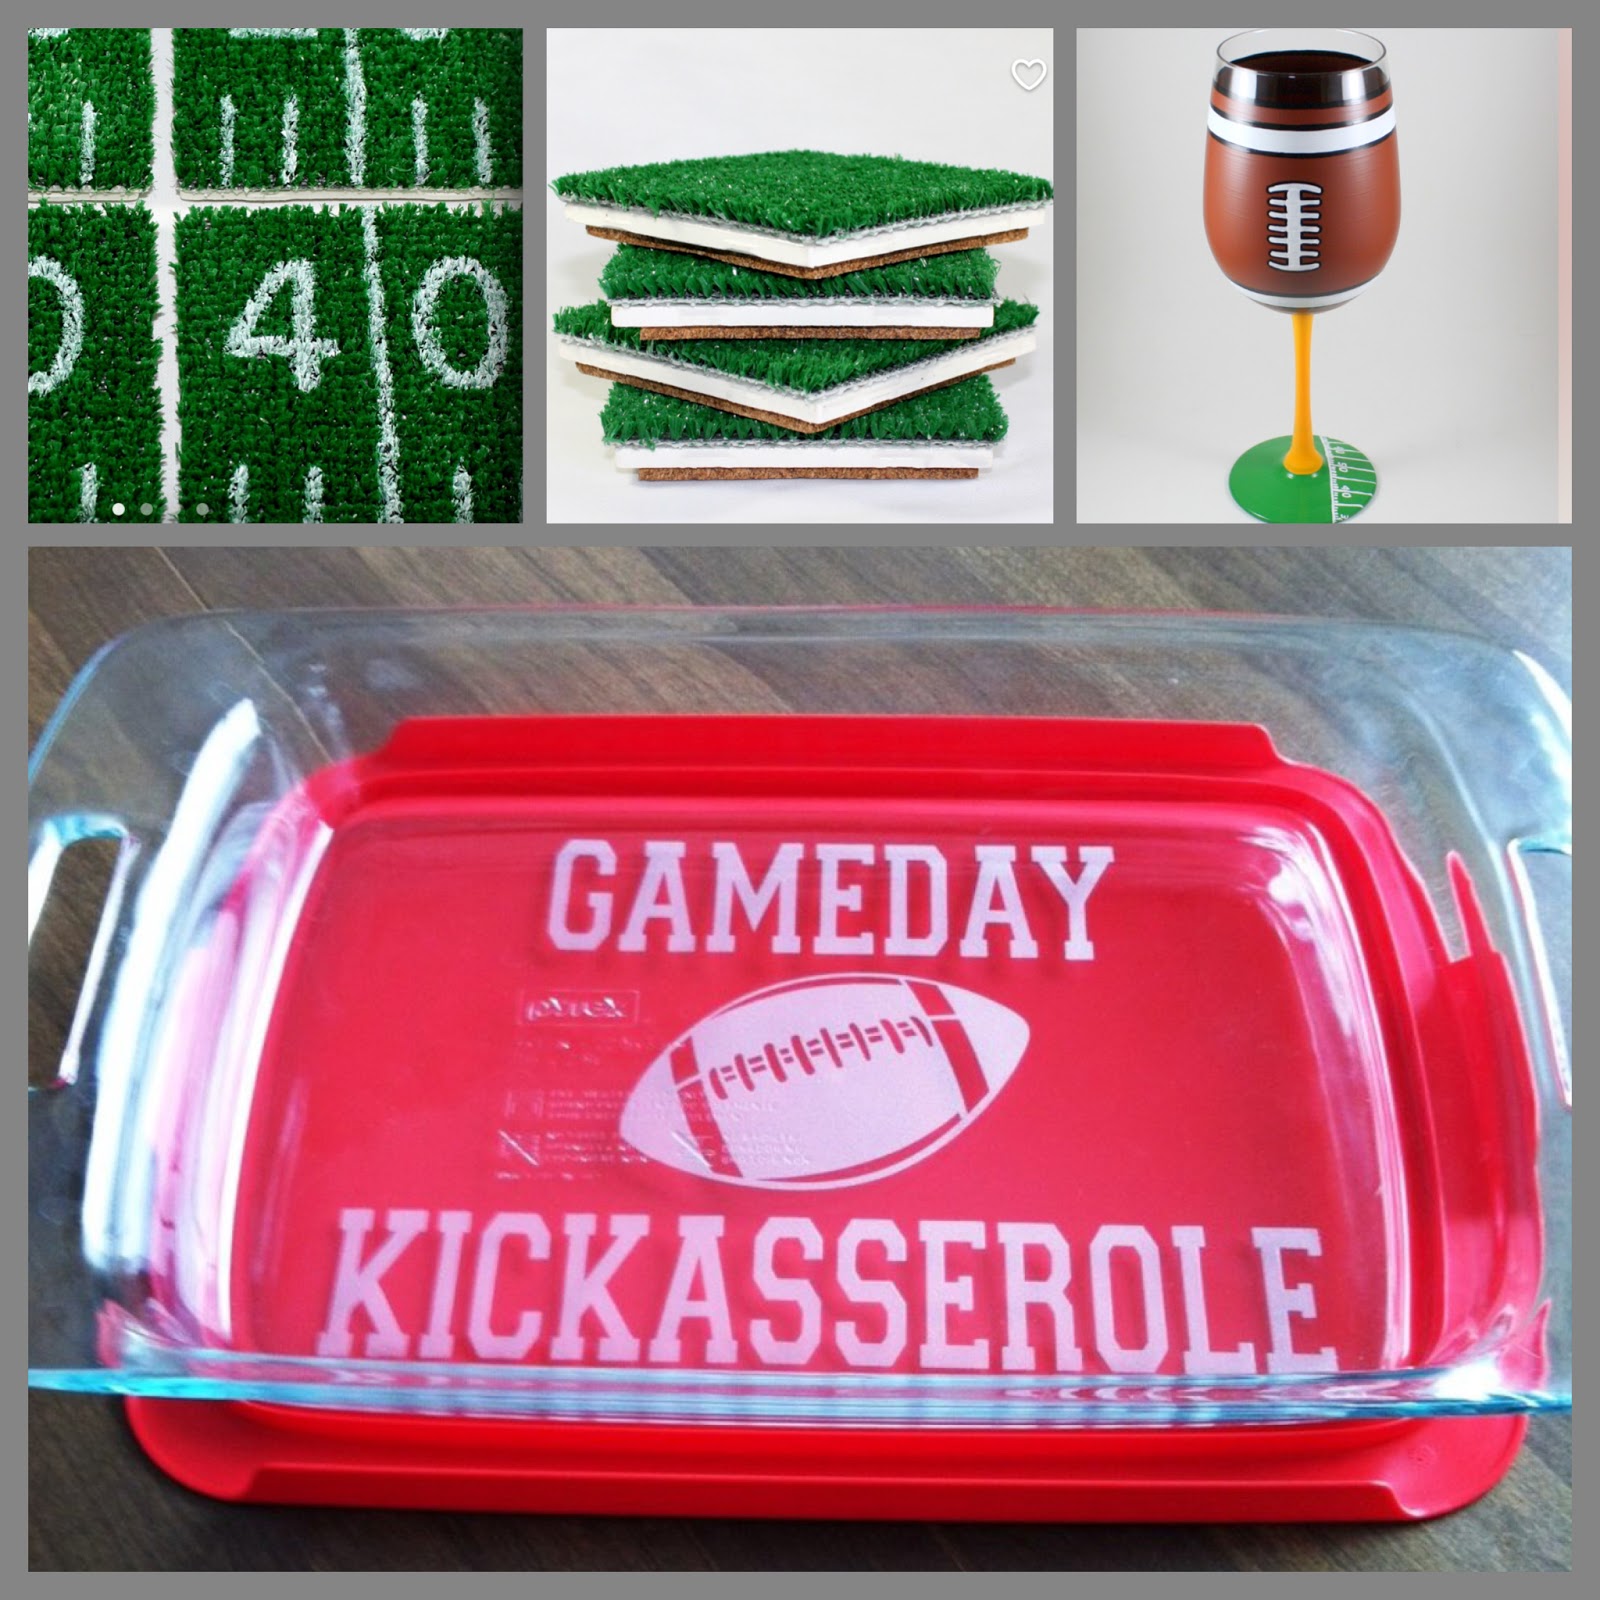 Gameday Kickasserole Etched Glass Pyrex Dish 8 X 8 Tailgating Party 2 Quart 